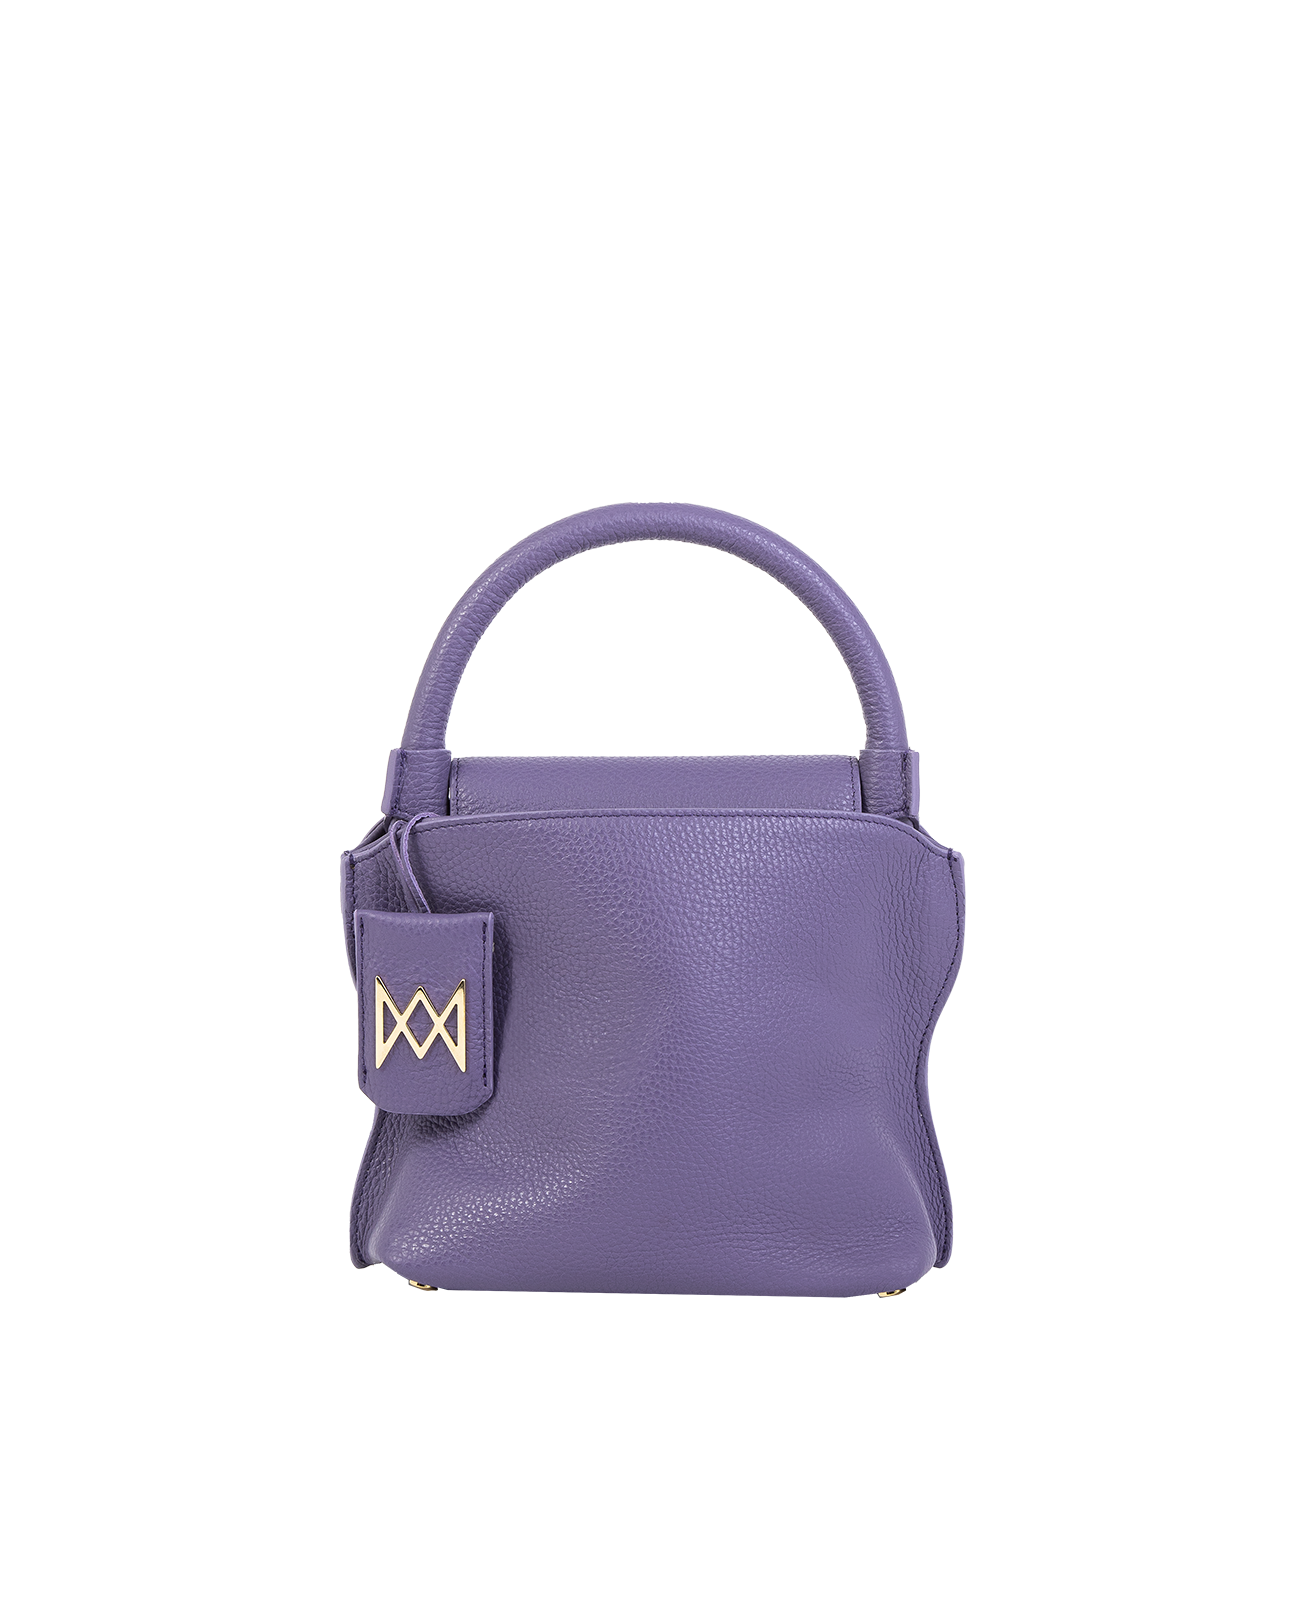 Cross-body bag in Italian full-grain leather, semi-aniline calf Italian leather with detachable shoulder strap.Three compartments, zip pocket in the back compartment. Magnetic flap closure with logo. Color: Purple. Size:Medium